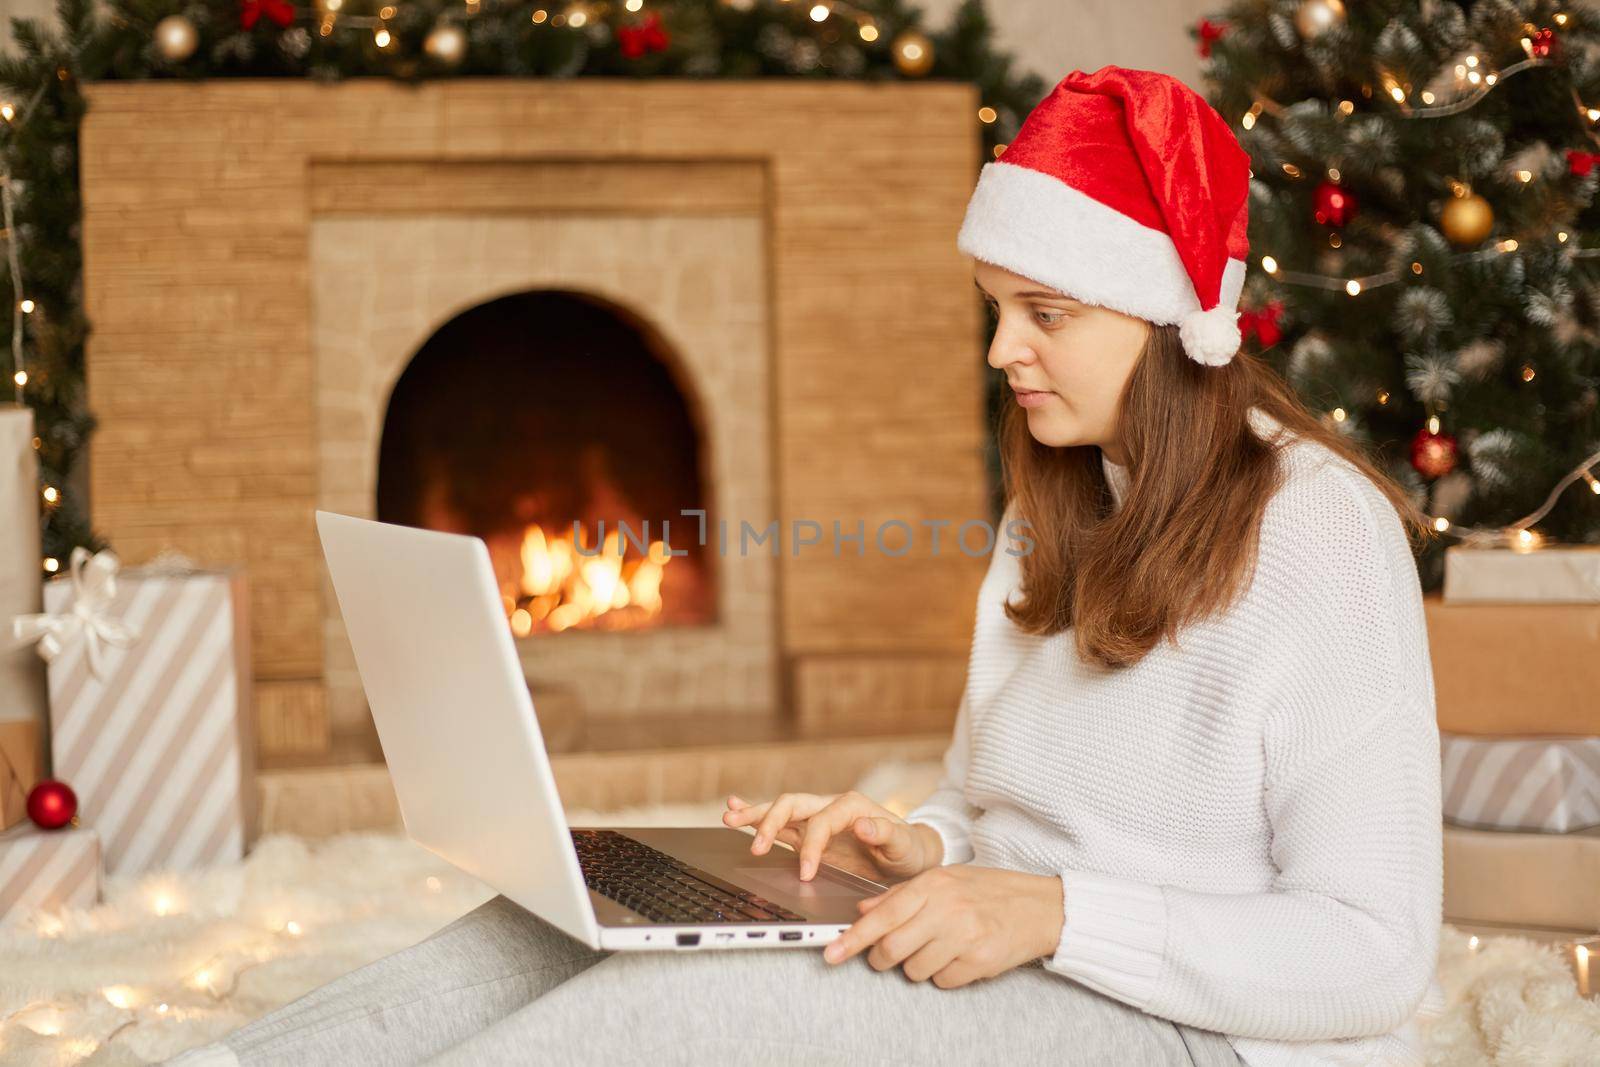 Christmas online, working via Internet. Caucasian girl at home using laptop computer notebook for video call, wears Santa hat and white sweater. Woman looking to camera of laptop, sits near fireplace